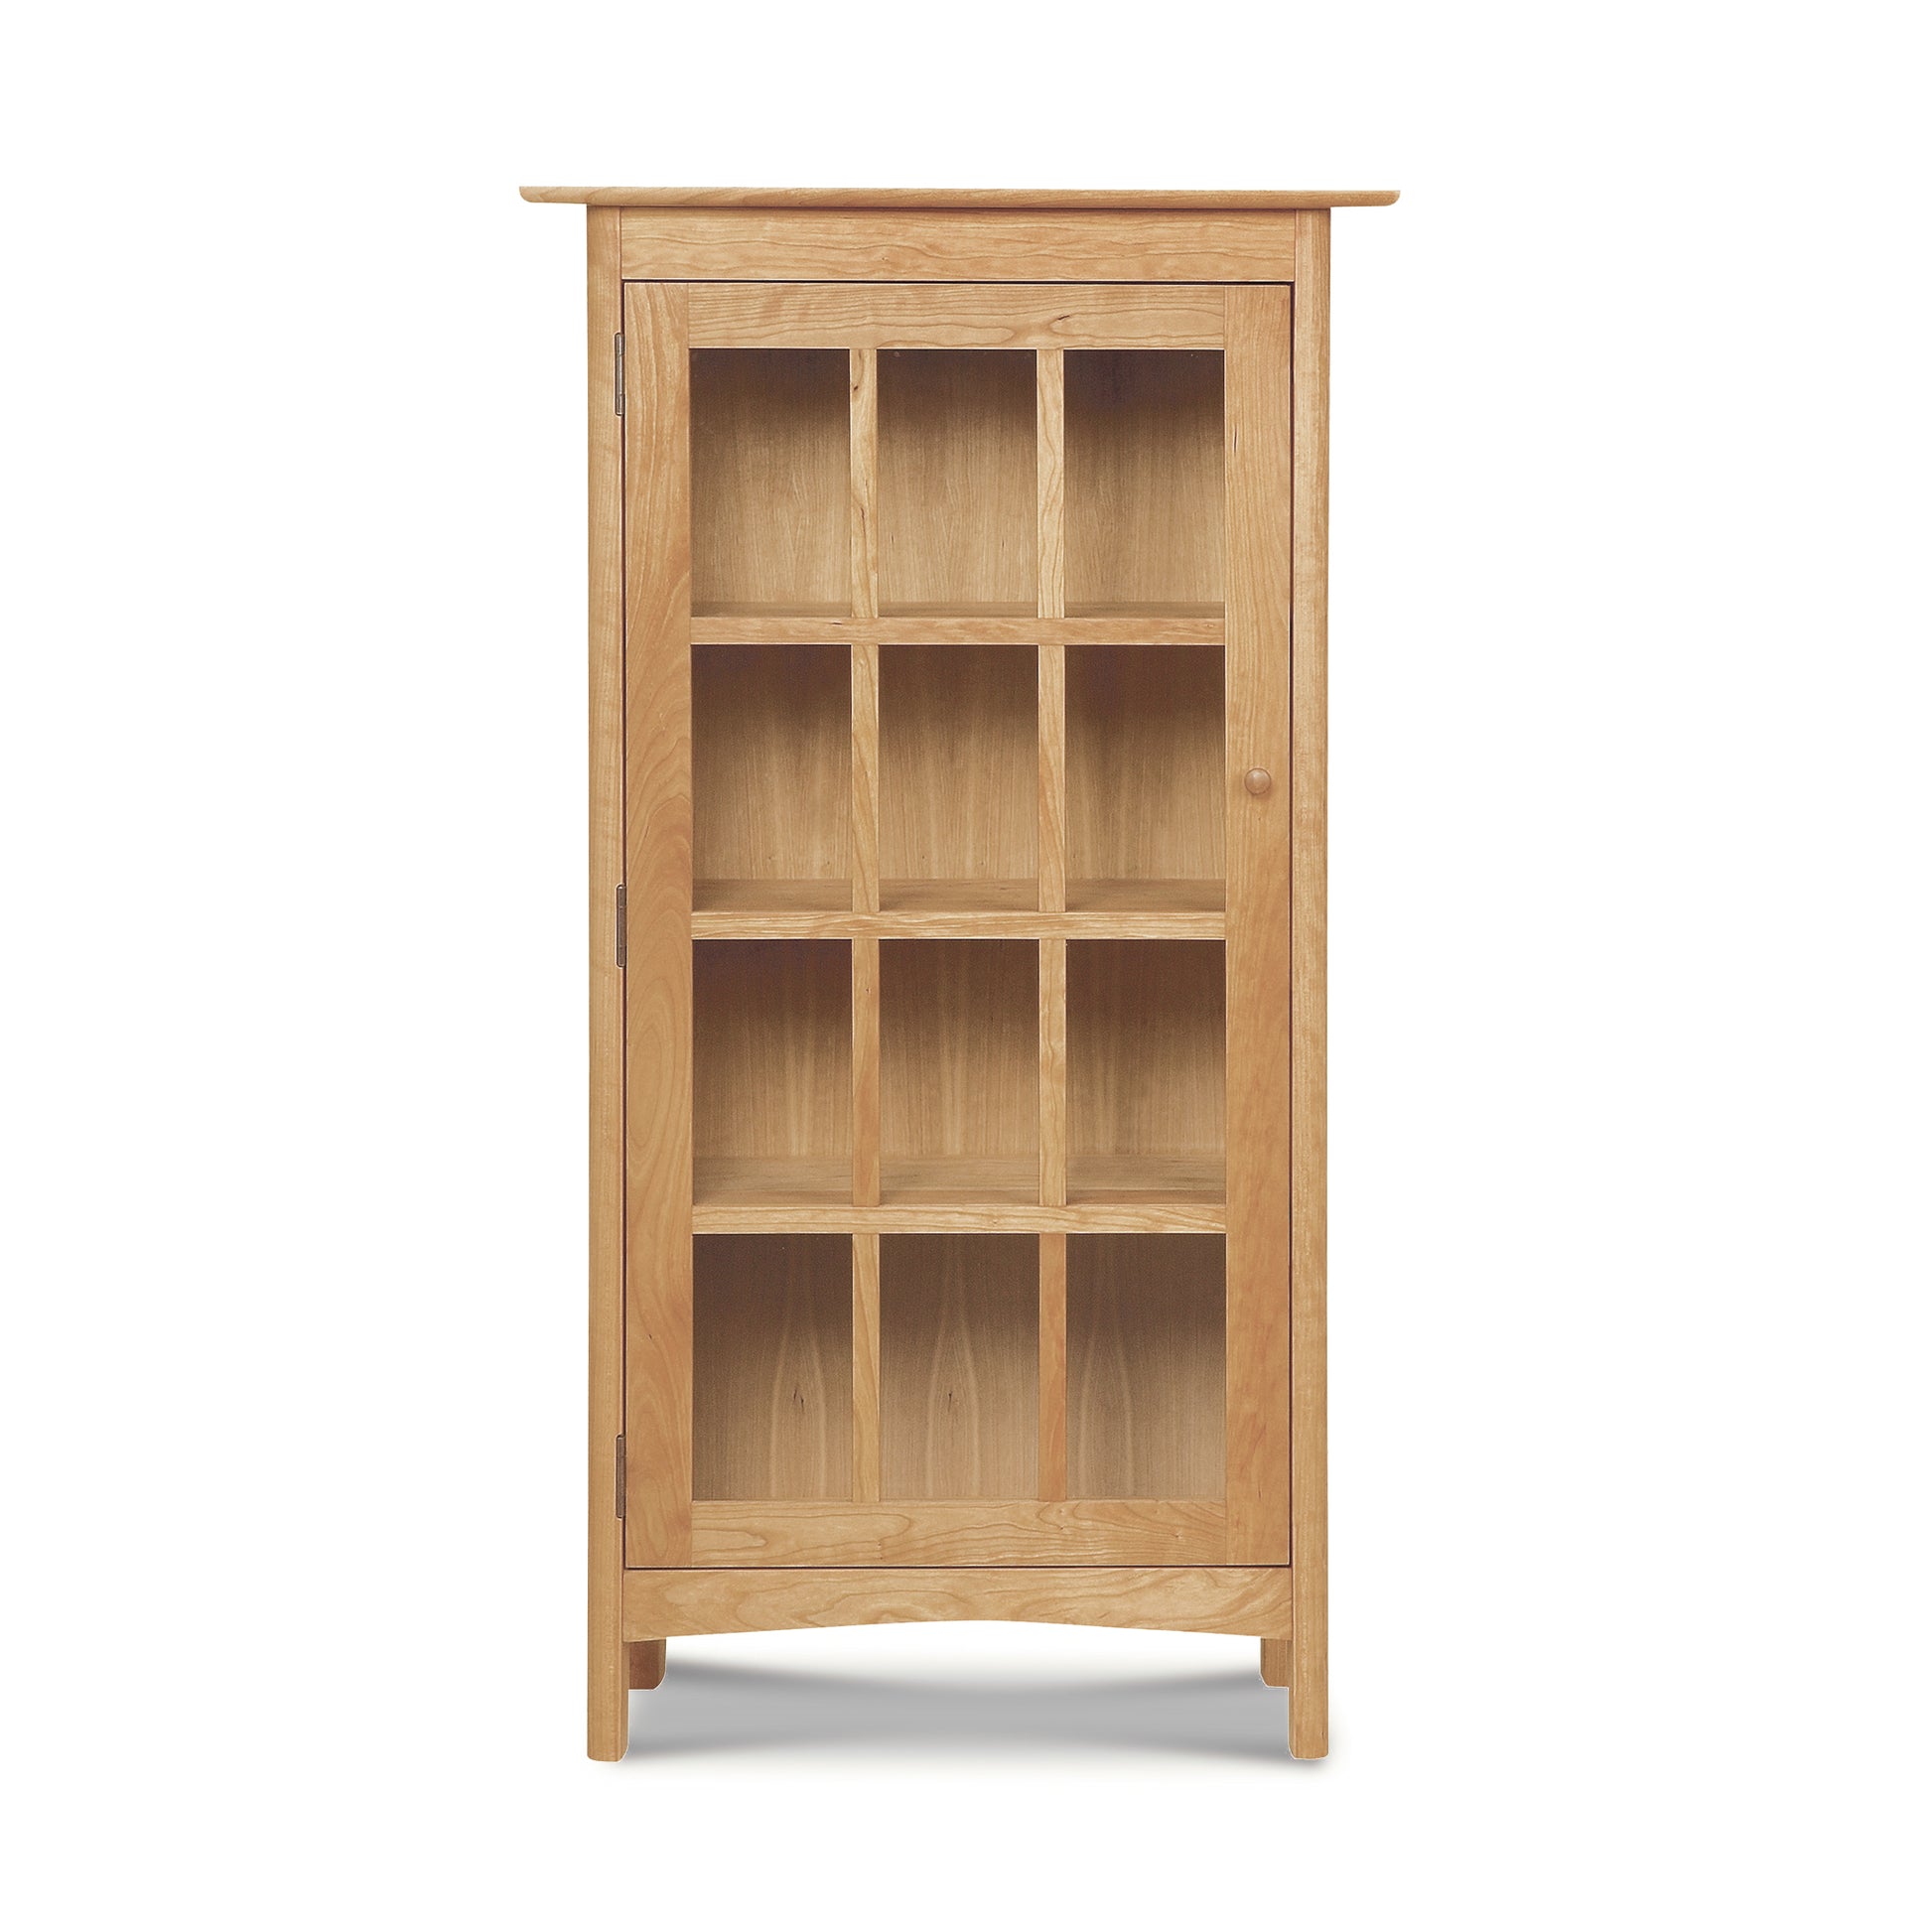 Luxury Heartwood Shaker Glass Door Bookcase with multiple compartments, featuring an eco-friendly oil finish from Vermont Furniture Designs, against a white background.